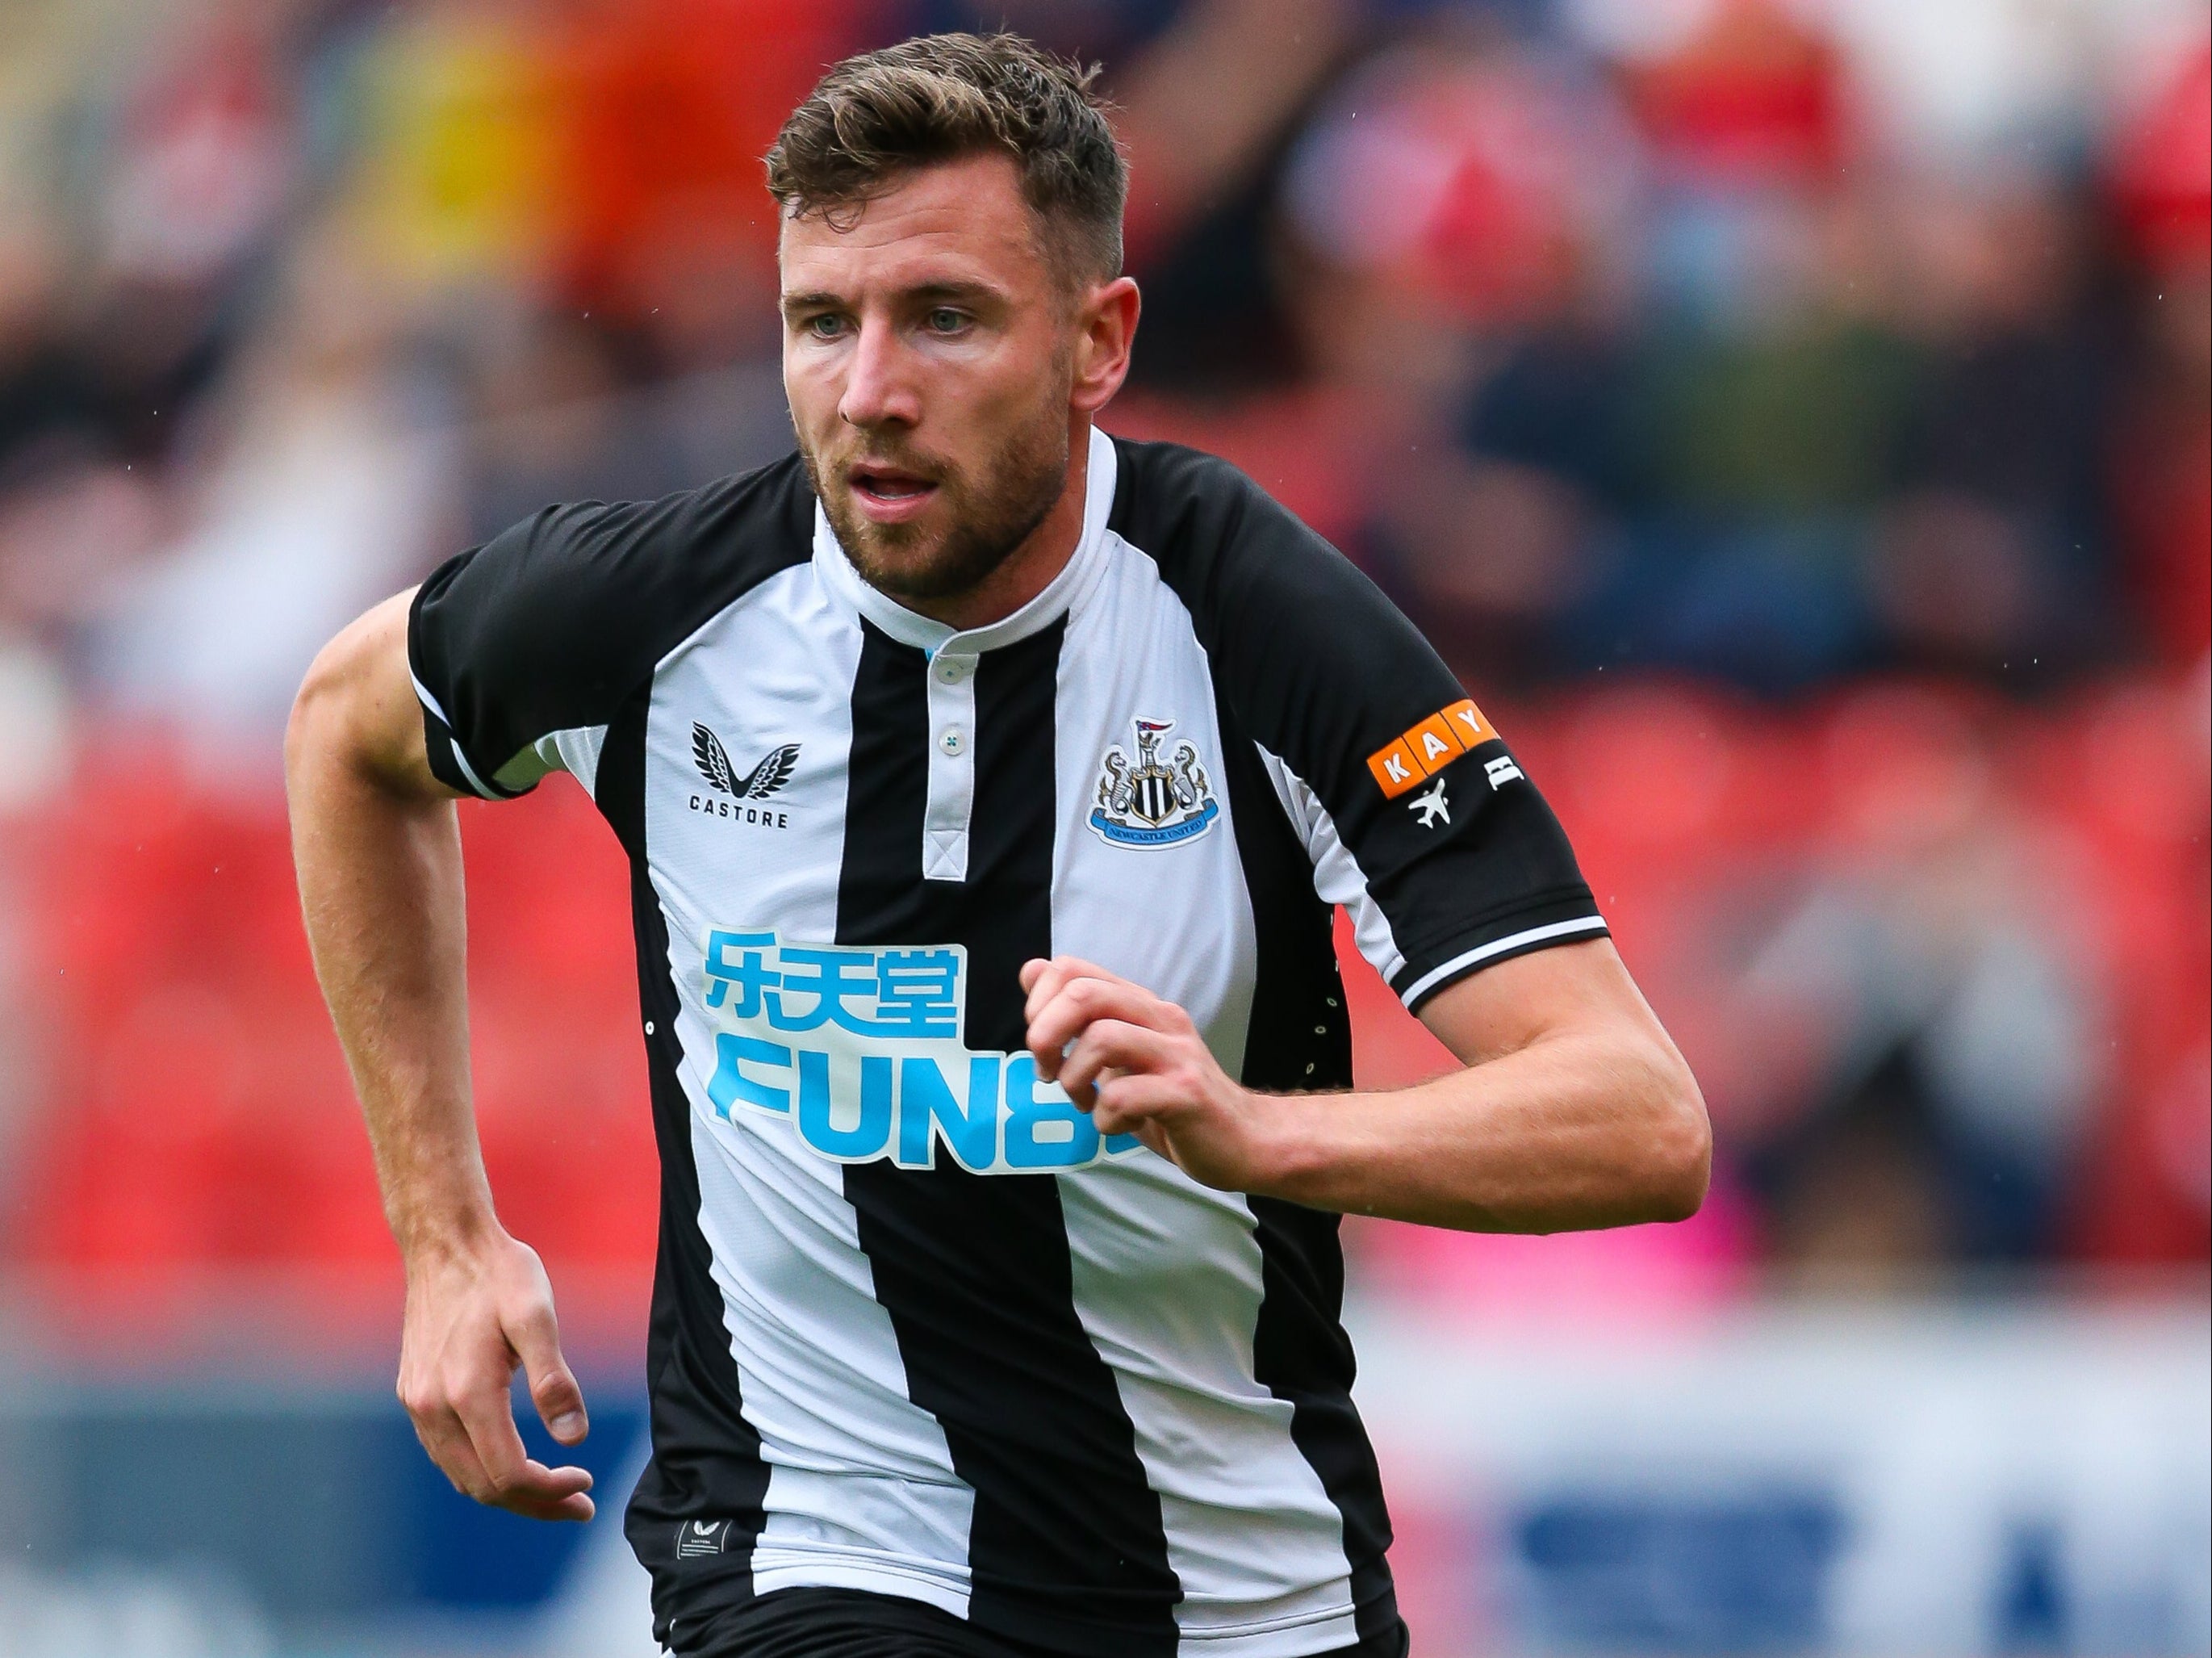 Newcastle defender Paul Dummett has signed a new contract